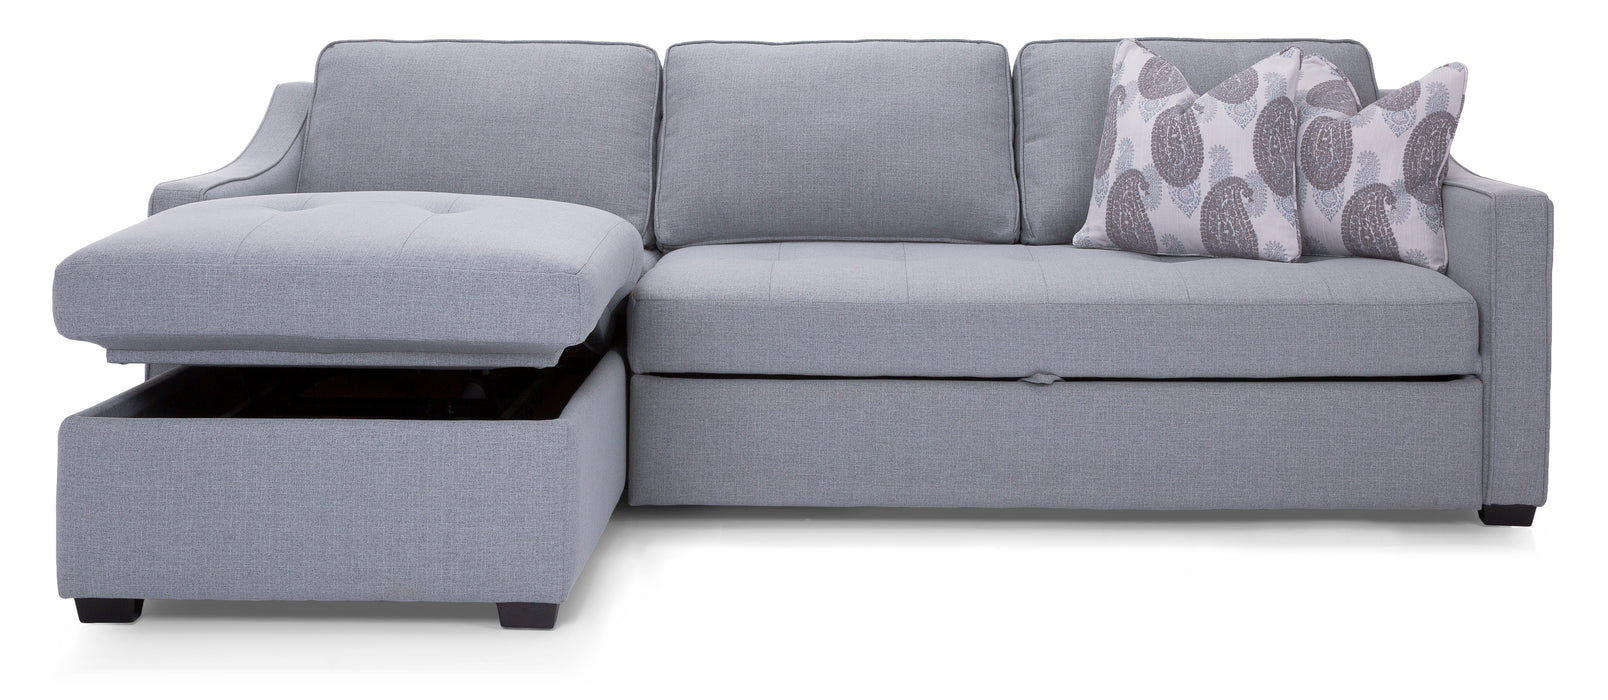 M2086 Sofa Bed Sectional